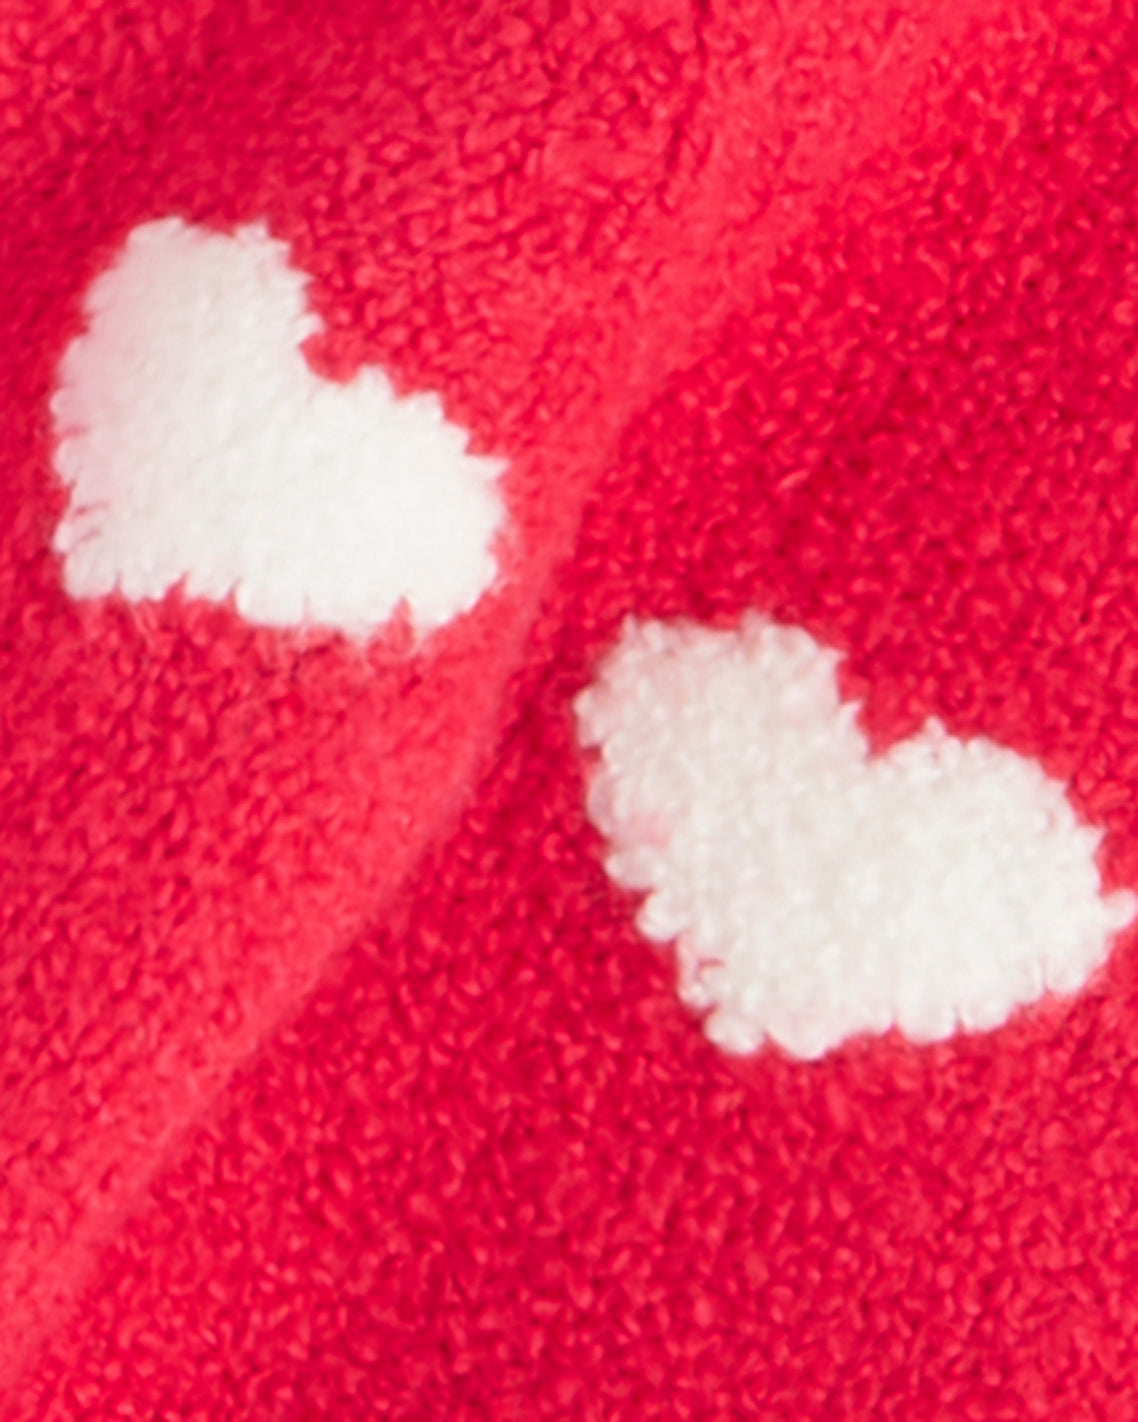 Kids Puff Sleeve Heart Sweater in Red